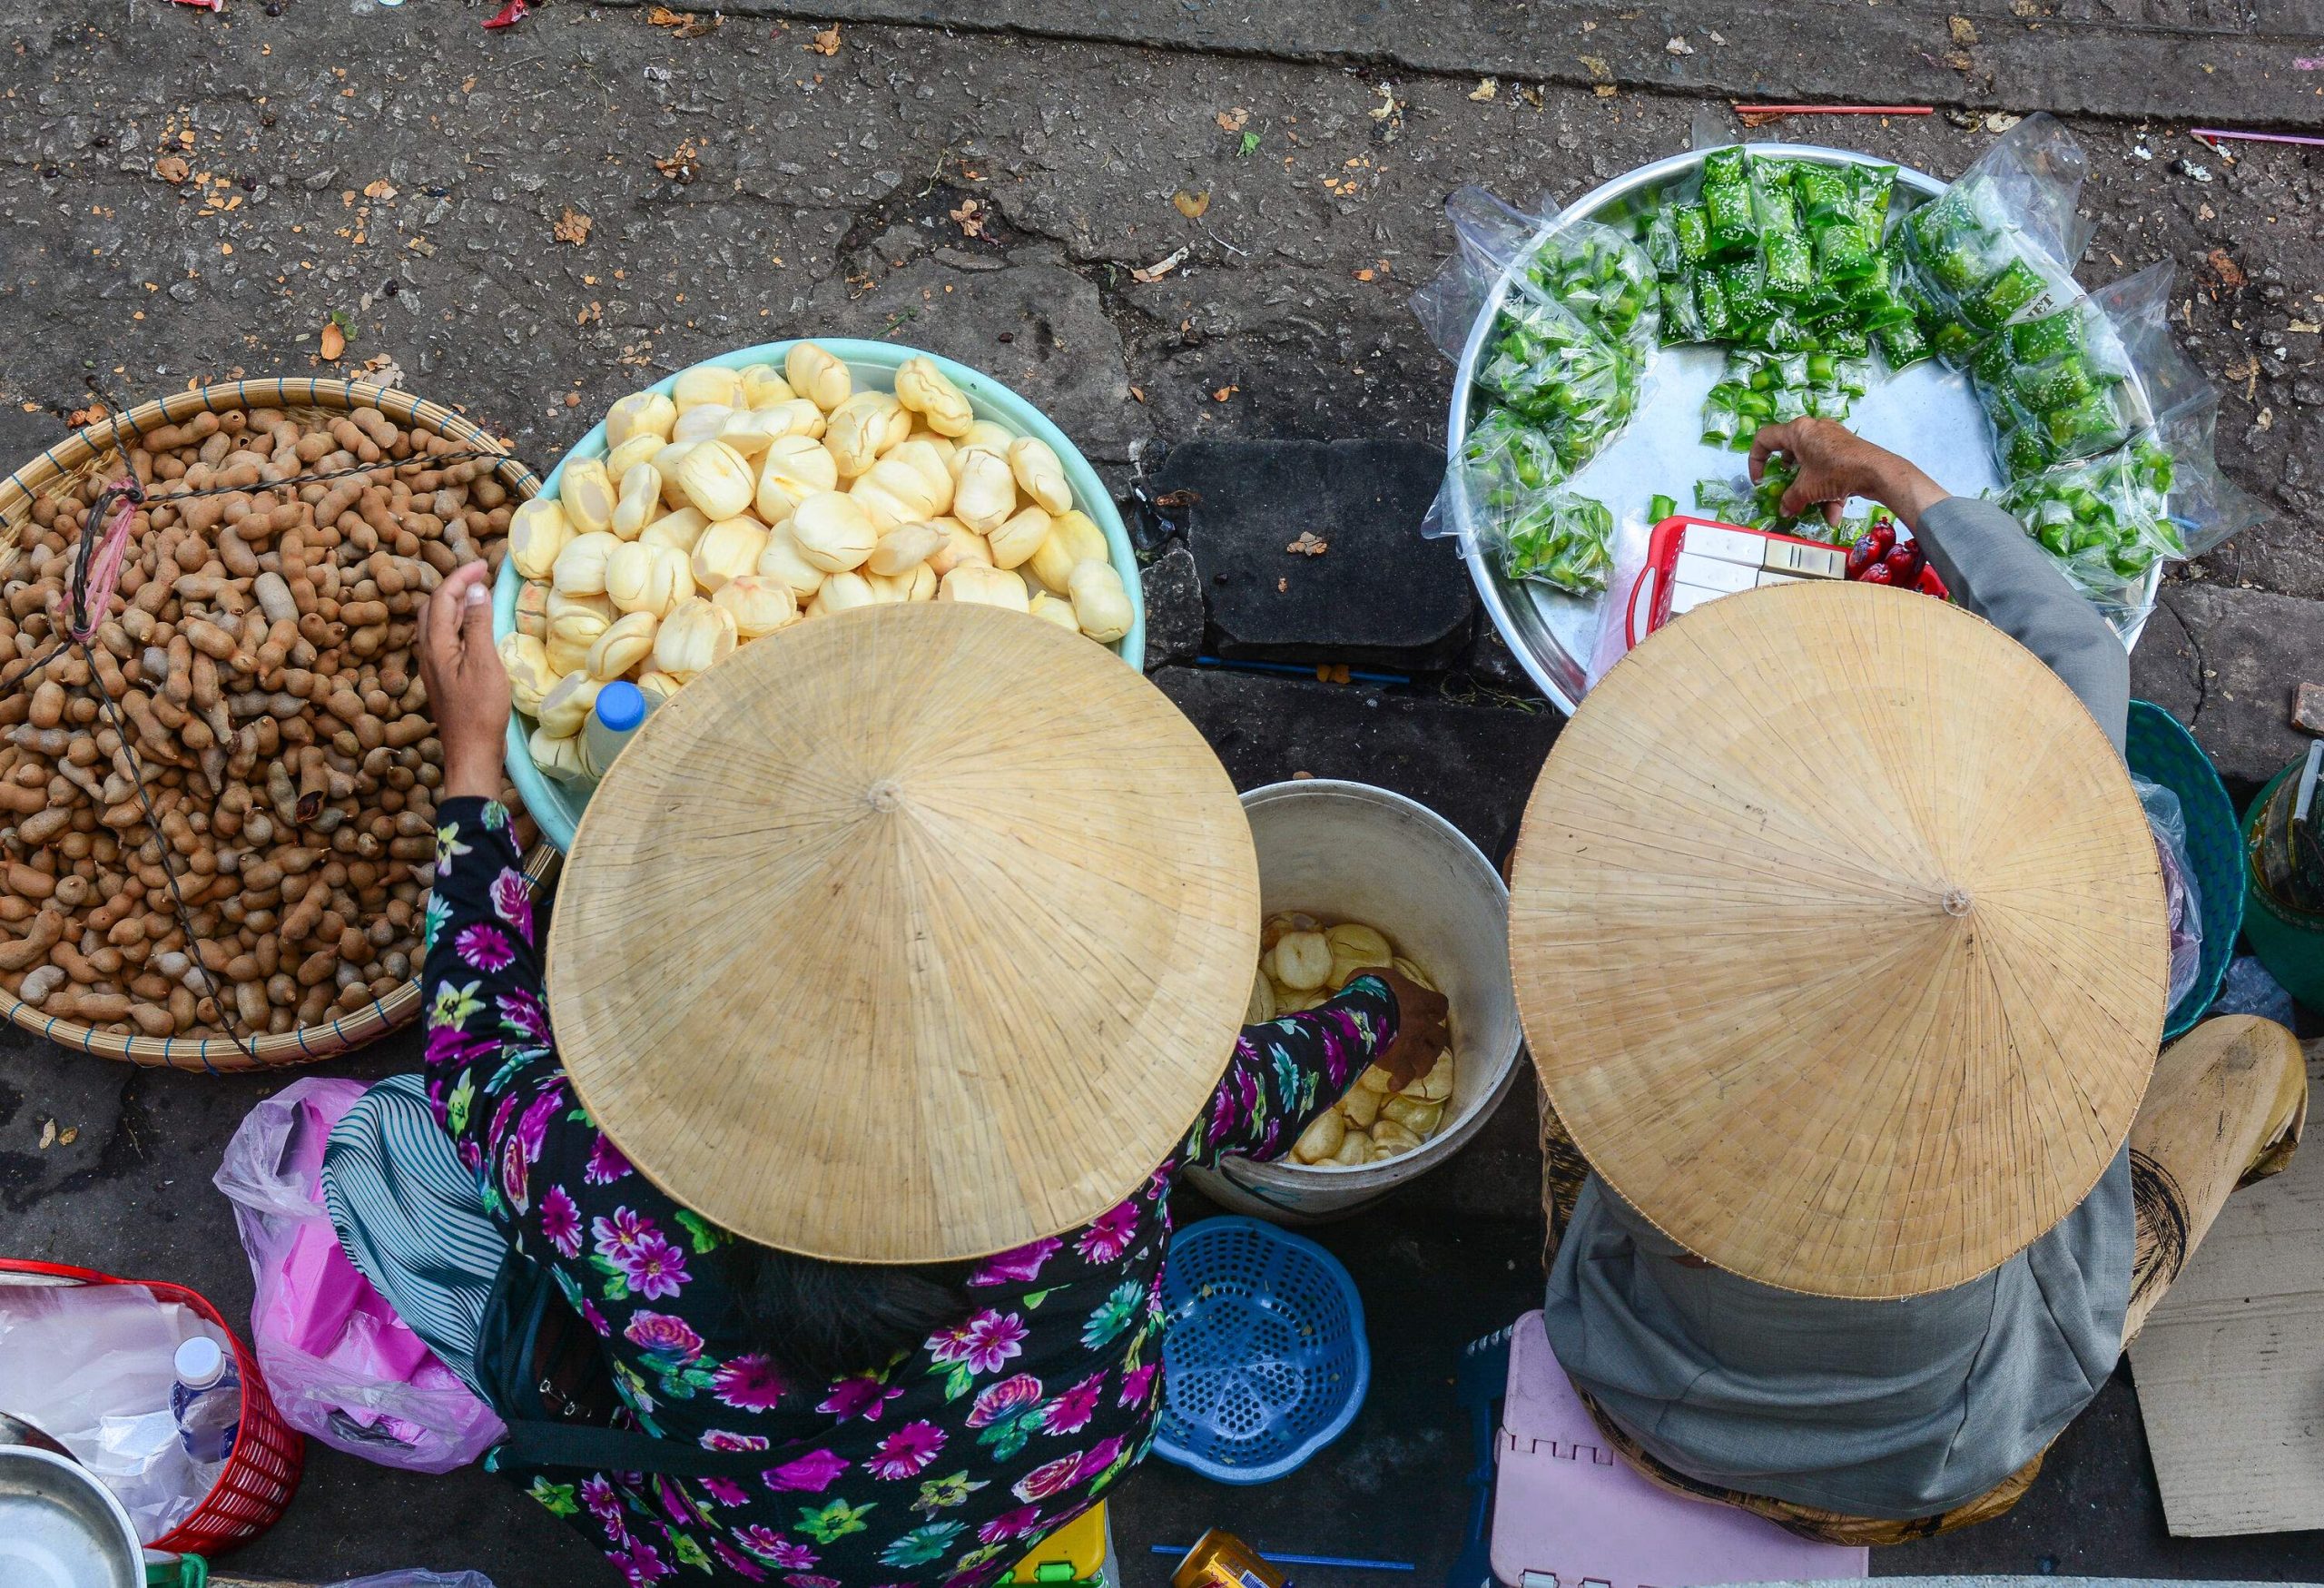 Vendors with big straw hats selling a variety of snacks on a street.